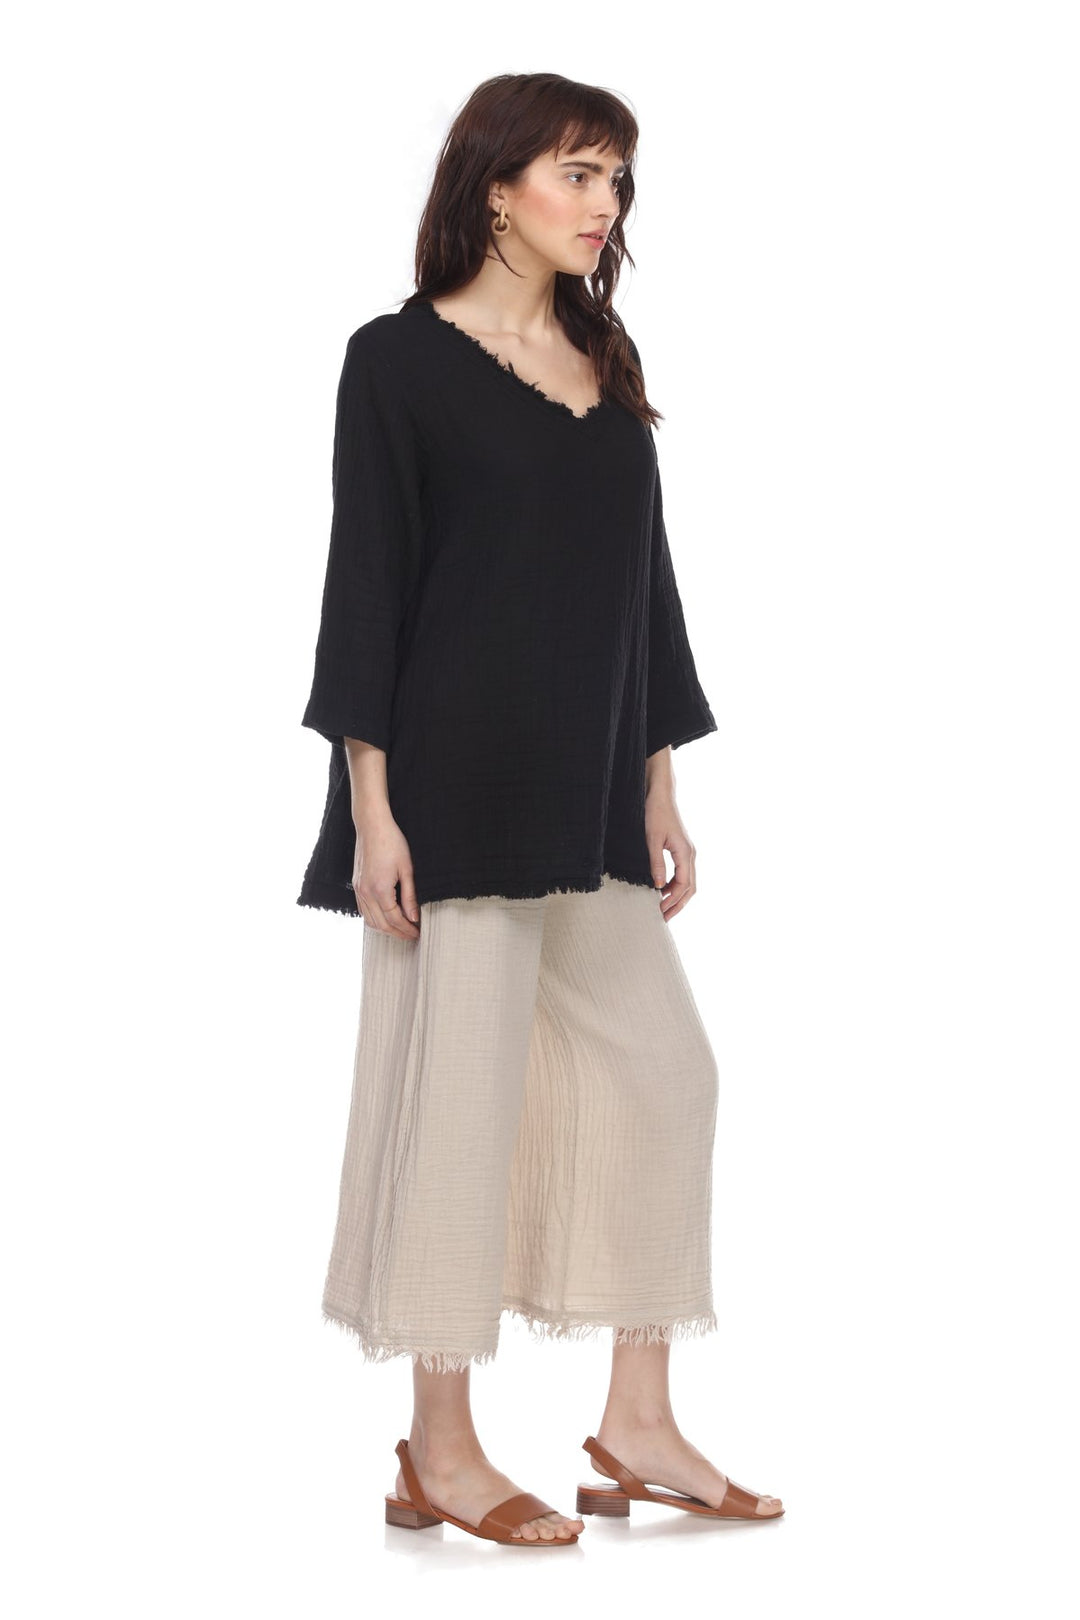 BLACK FRAYED TUNIC - Kingfisher Road - Online Boutique